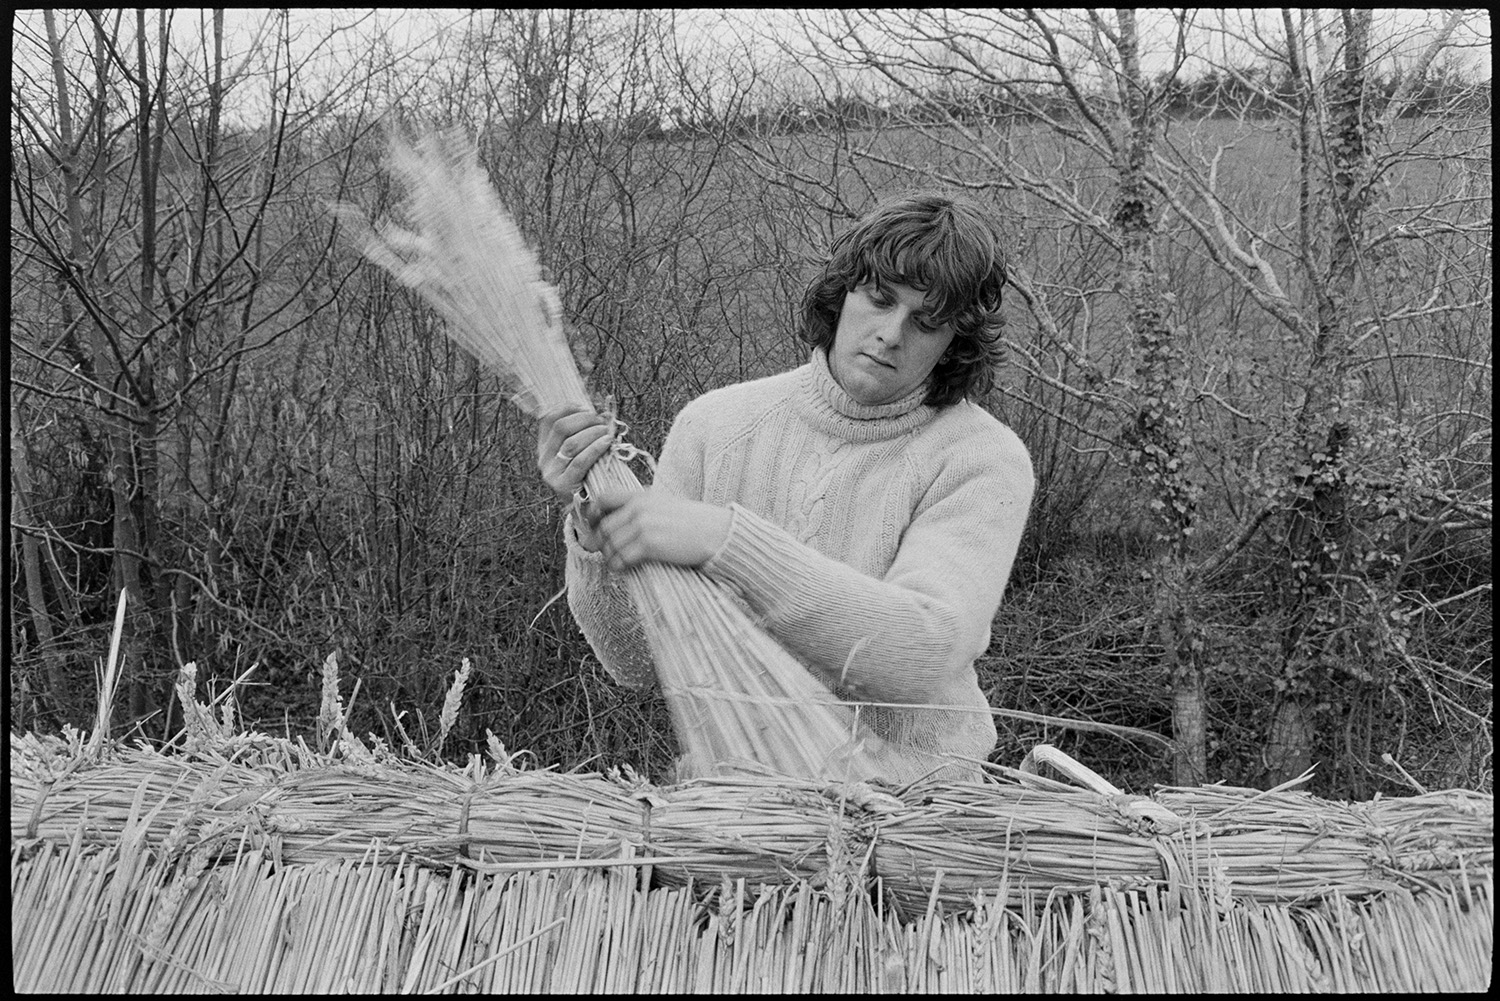 Thatcher thatching ridge of cob cottage, making spars. 
[A man thatching the ridge of a cob cottage at Addisford, Dolton. He is holding a bundle of reed and trees can be seen in the background.]